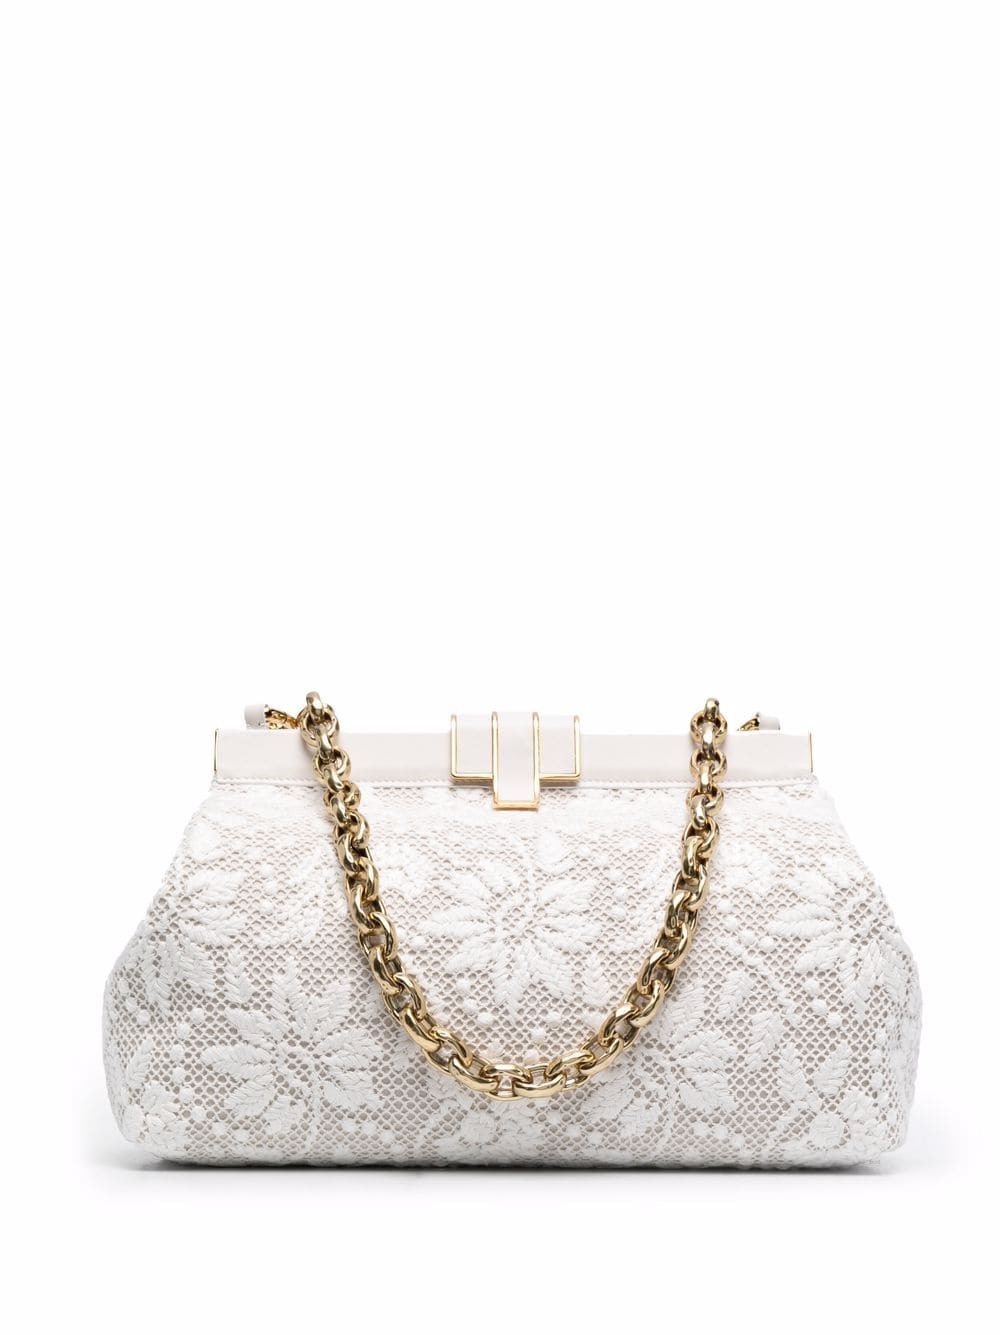 Ermanno Scervino White Clutch With Embossed Floral Embroidery